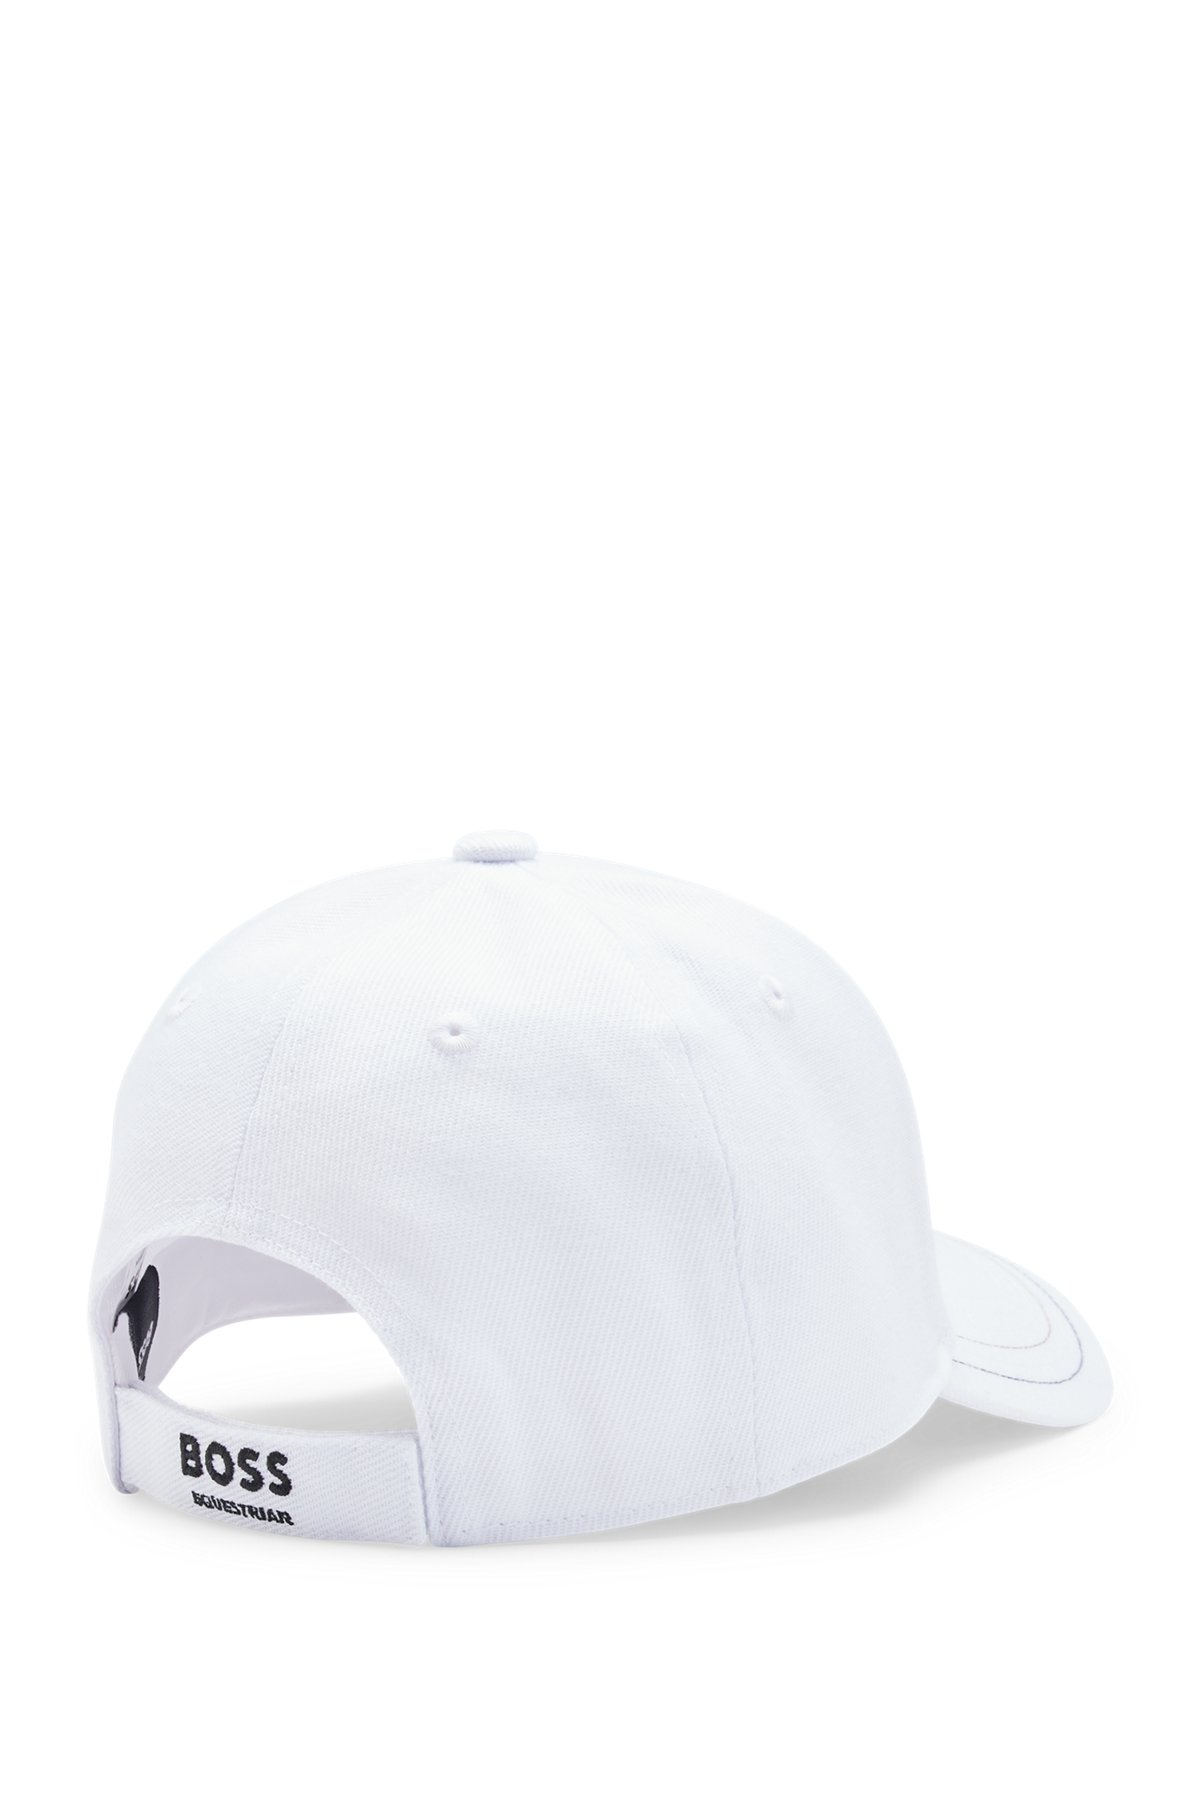 Equestrian five-panel cap with logo details, White